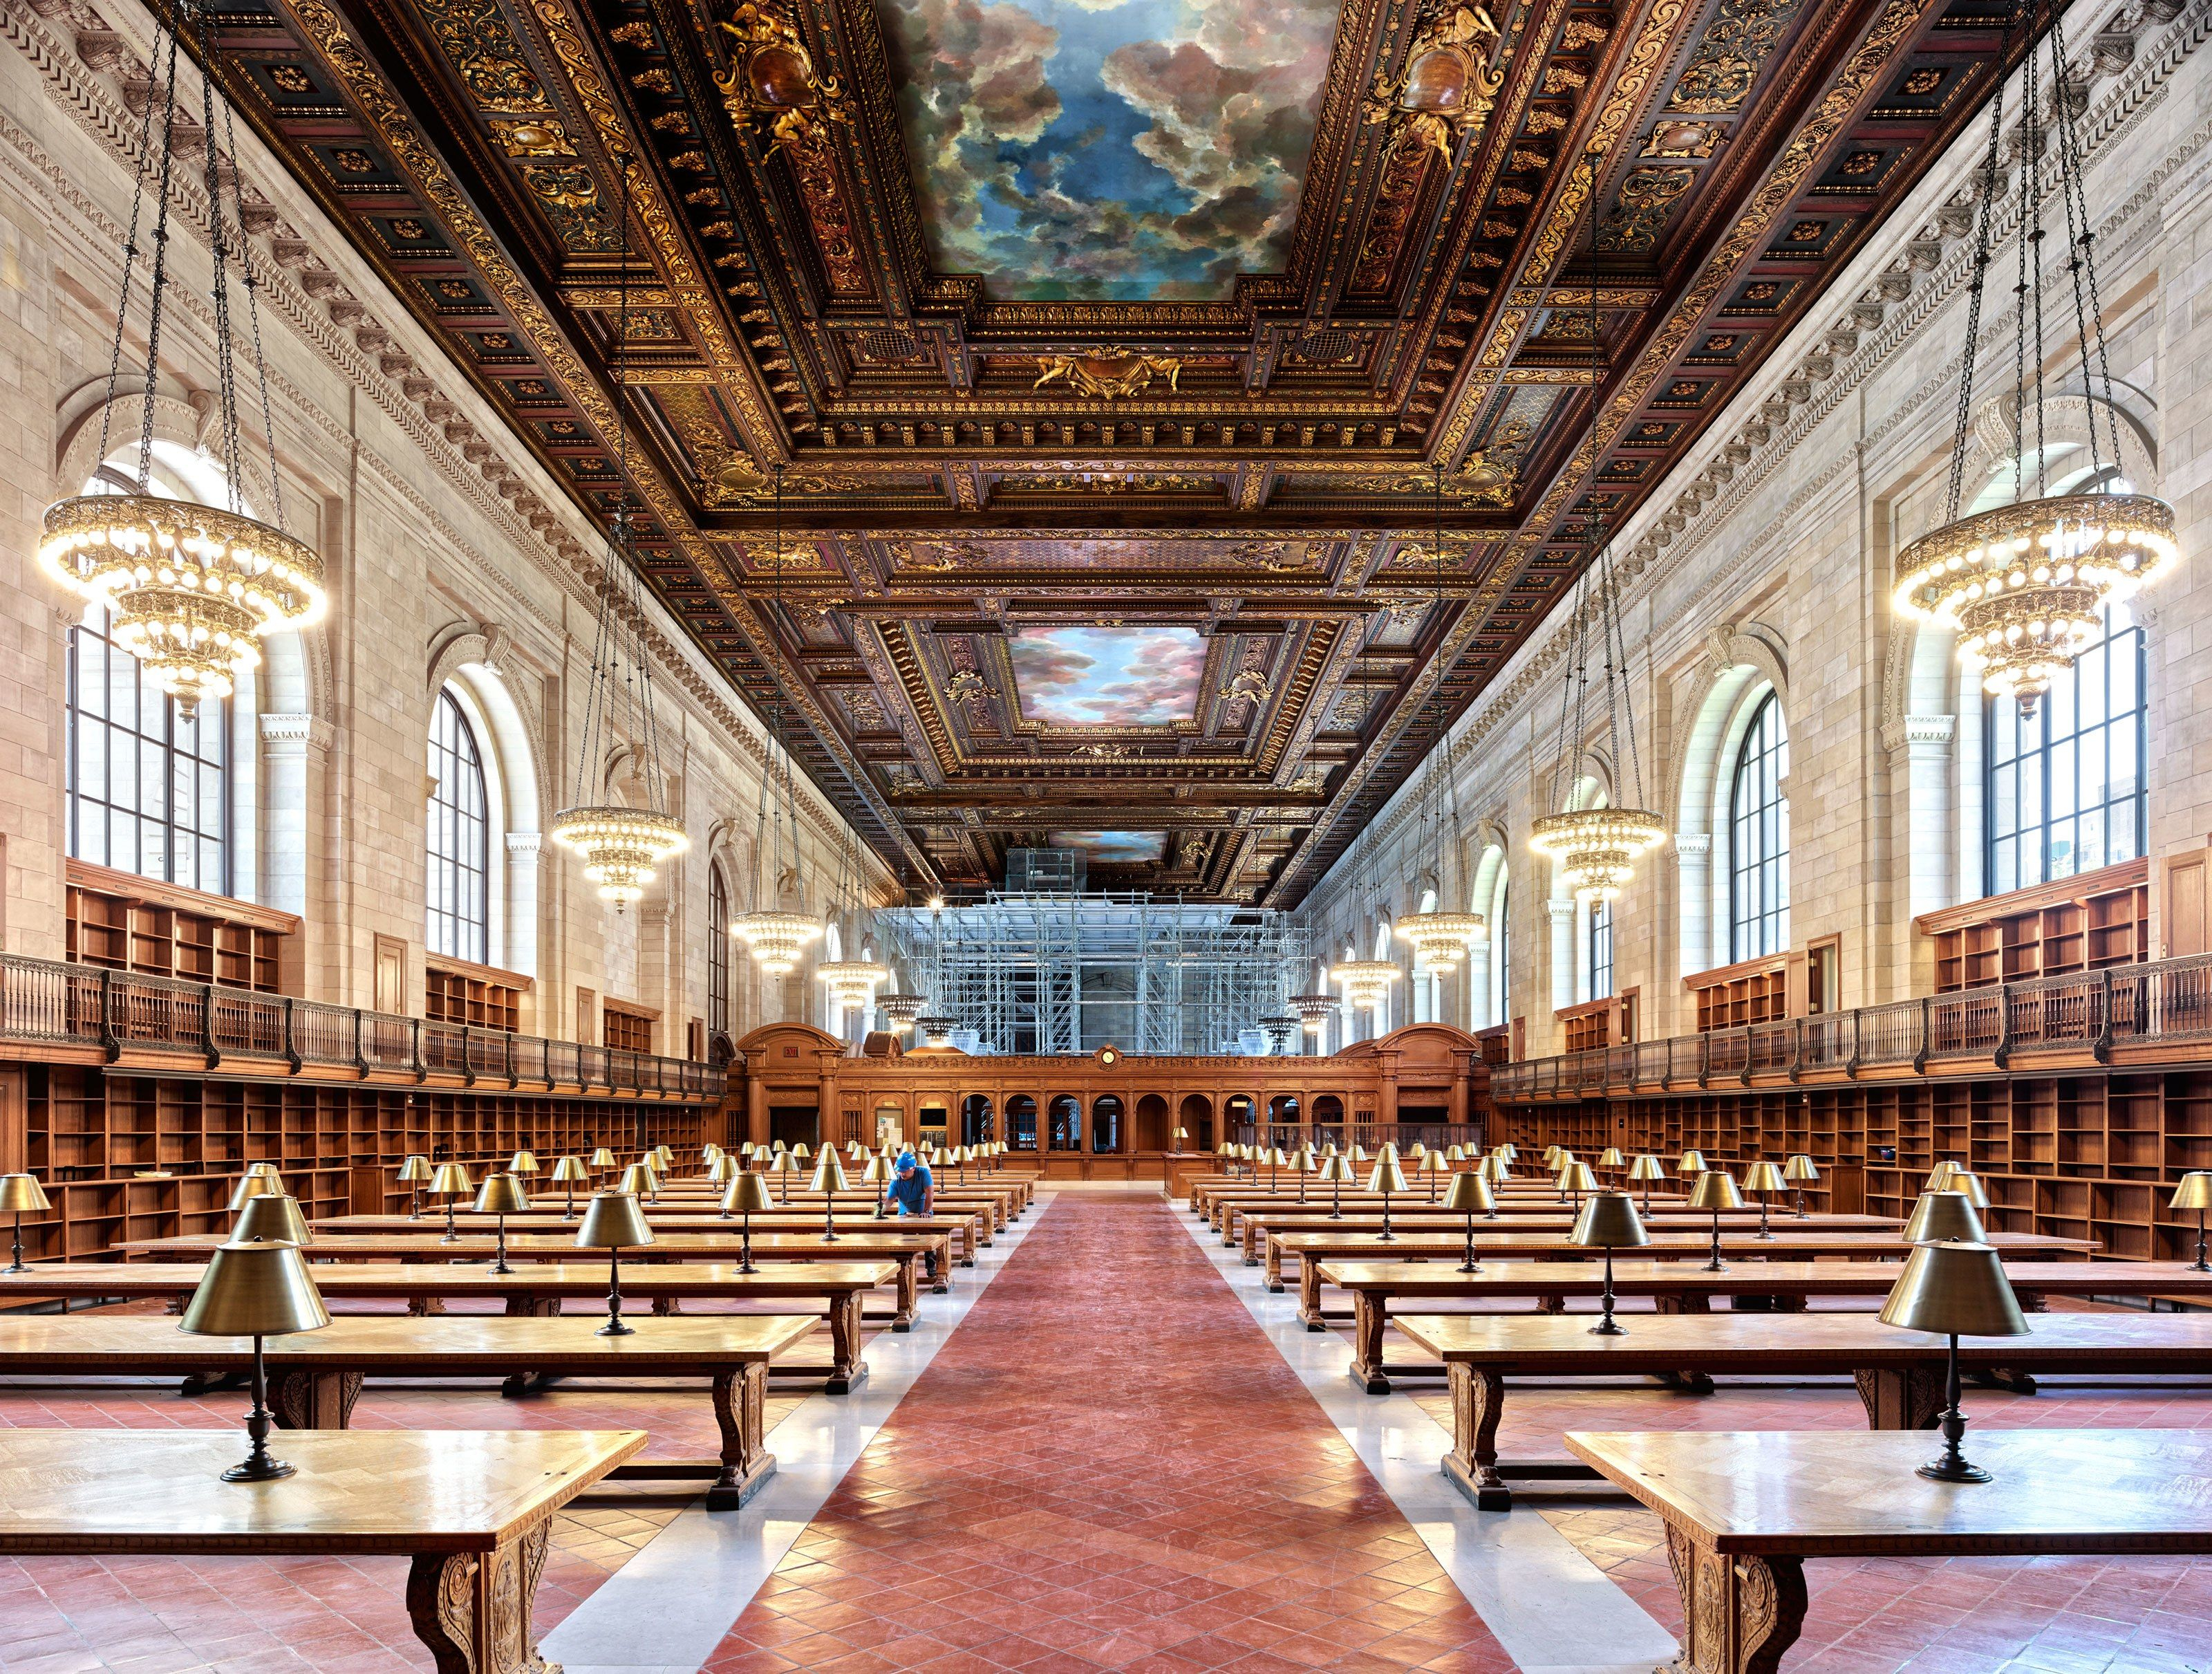 The New York Public Librarys Beloved Rose Main Reading Room intended for size 3200 X 2421